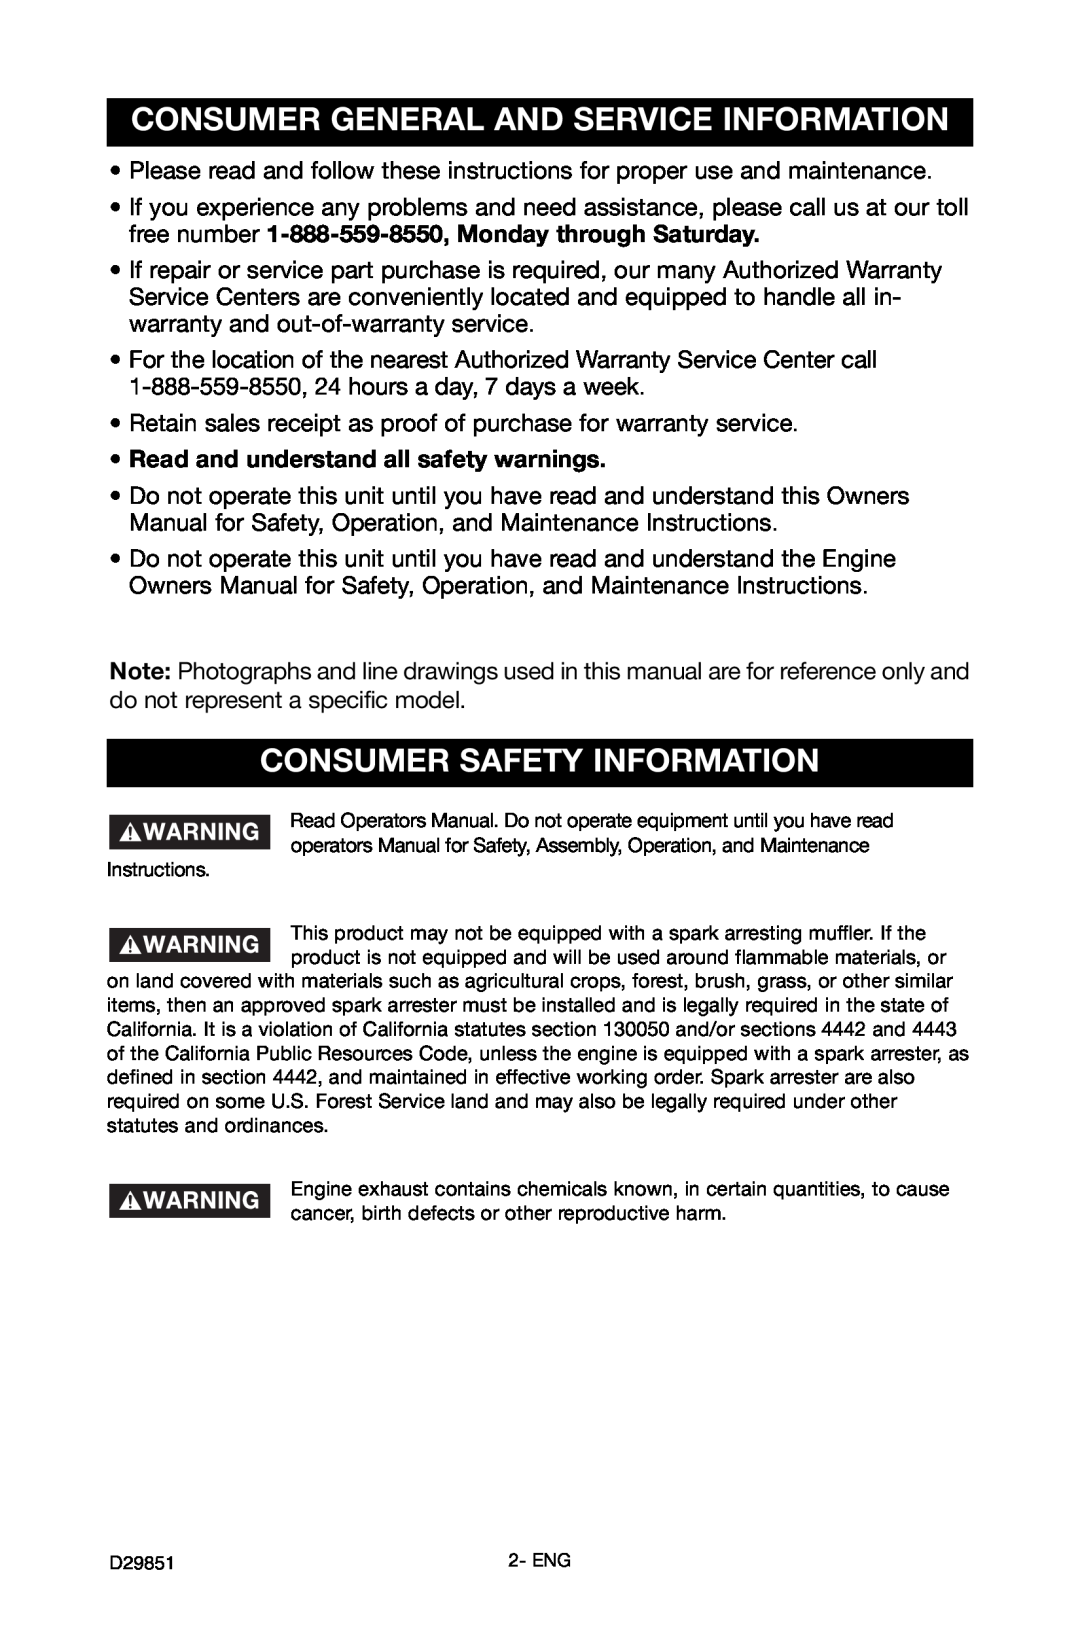 Porter-Cable D29851-038-0 instruction manual Consumer General And Service Information, Consumer Safety Information 